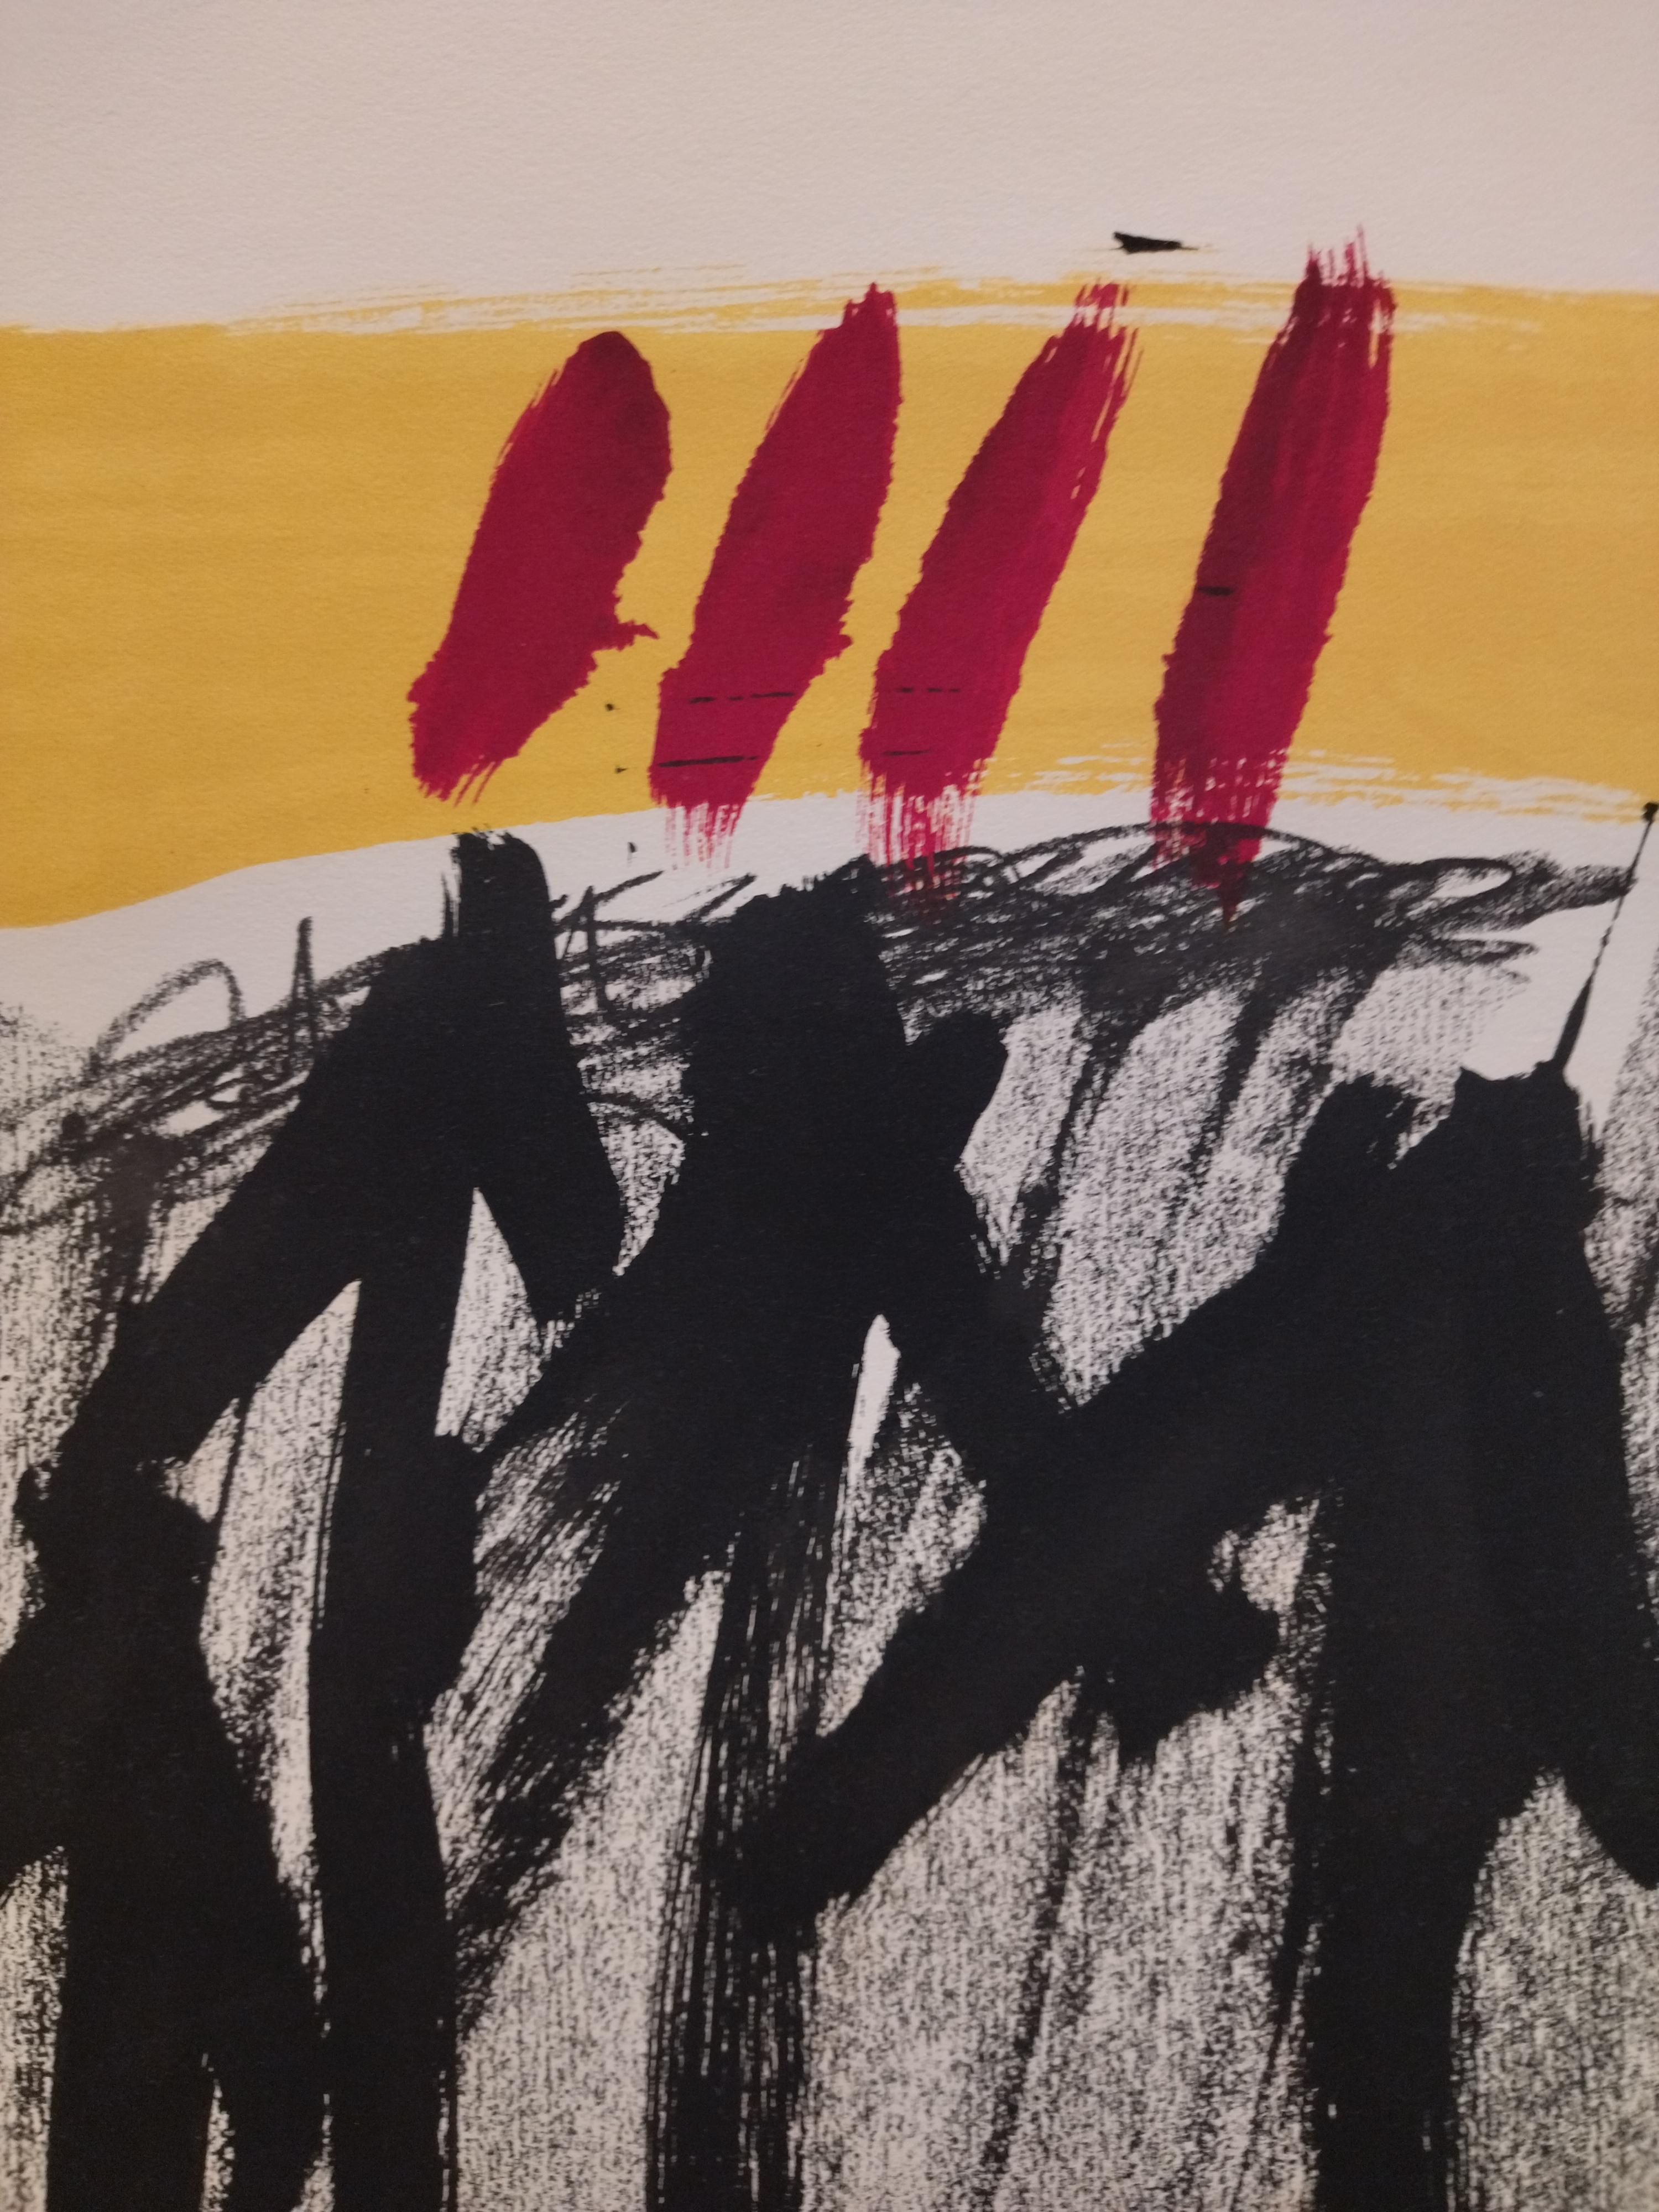  Tapies  Black  Red  Yellow  Vertical  original lithograph painting For Sale 2